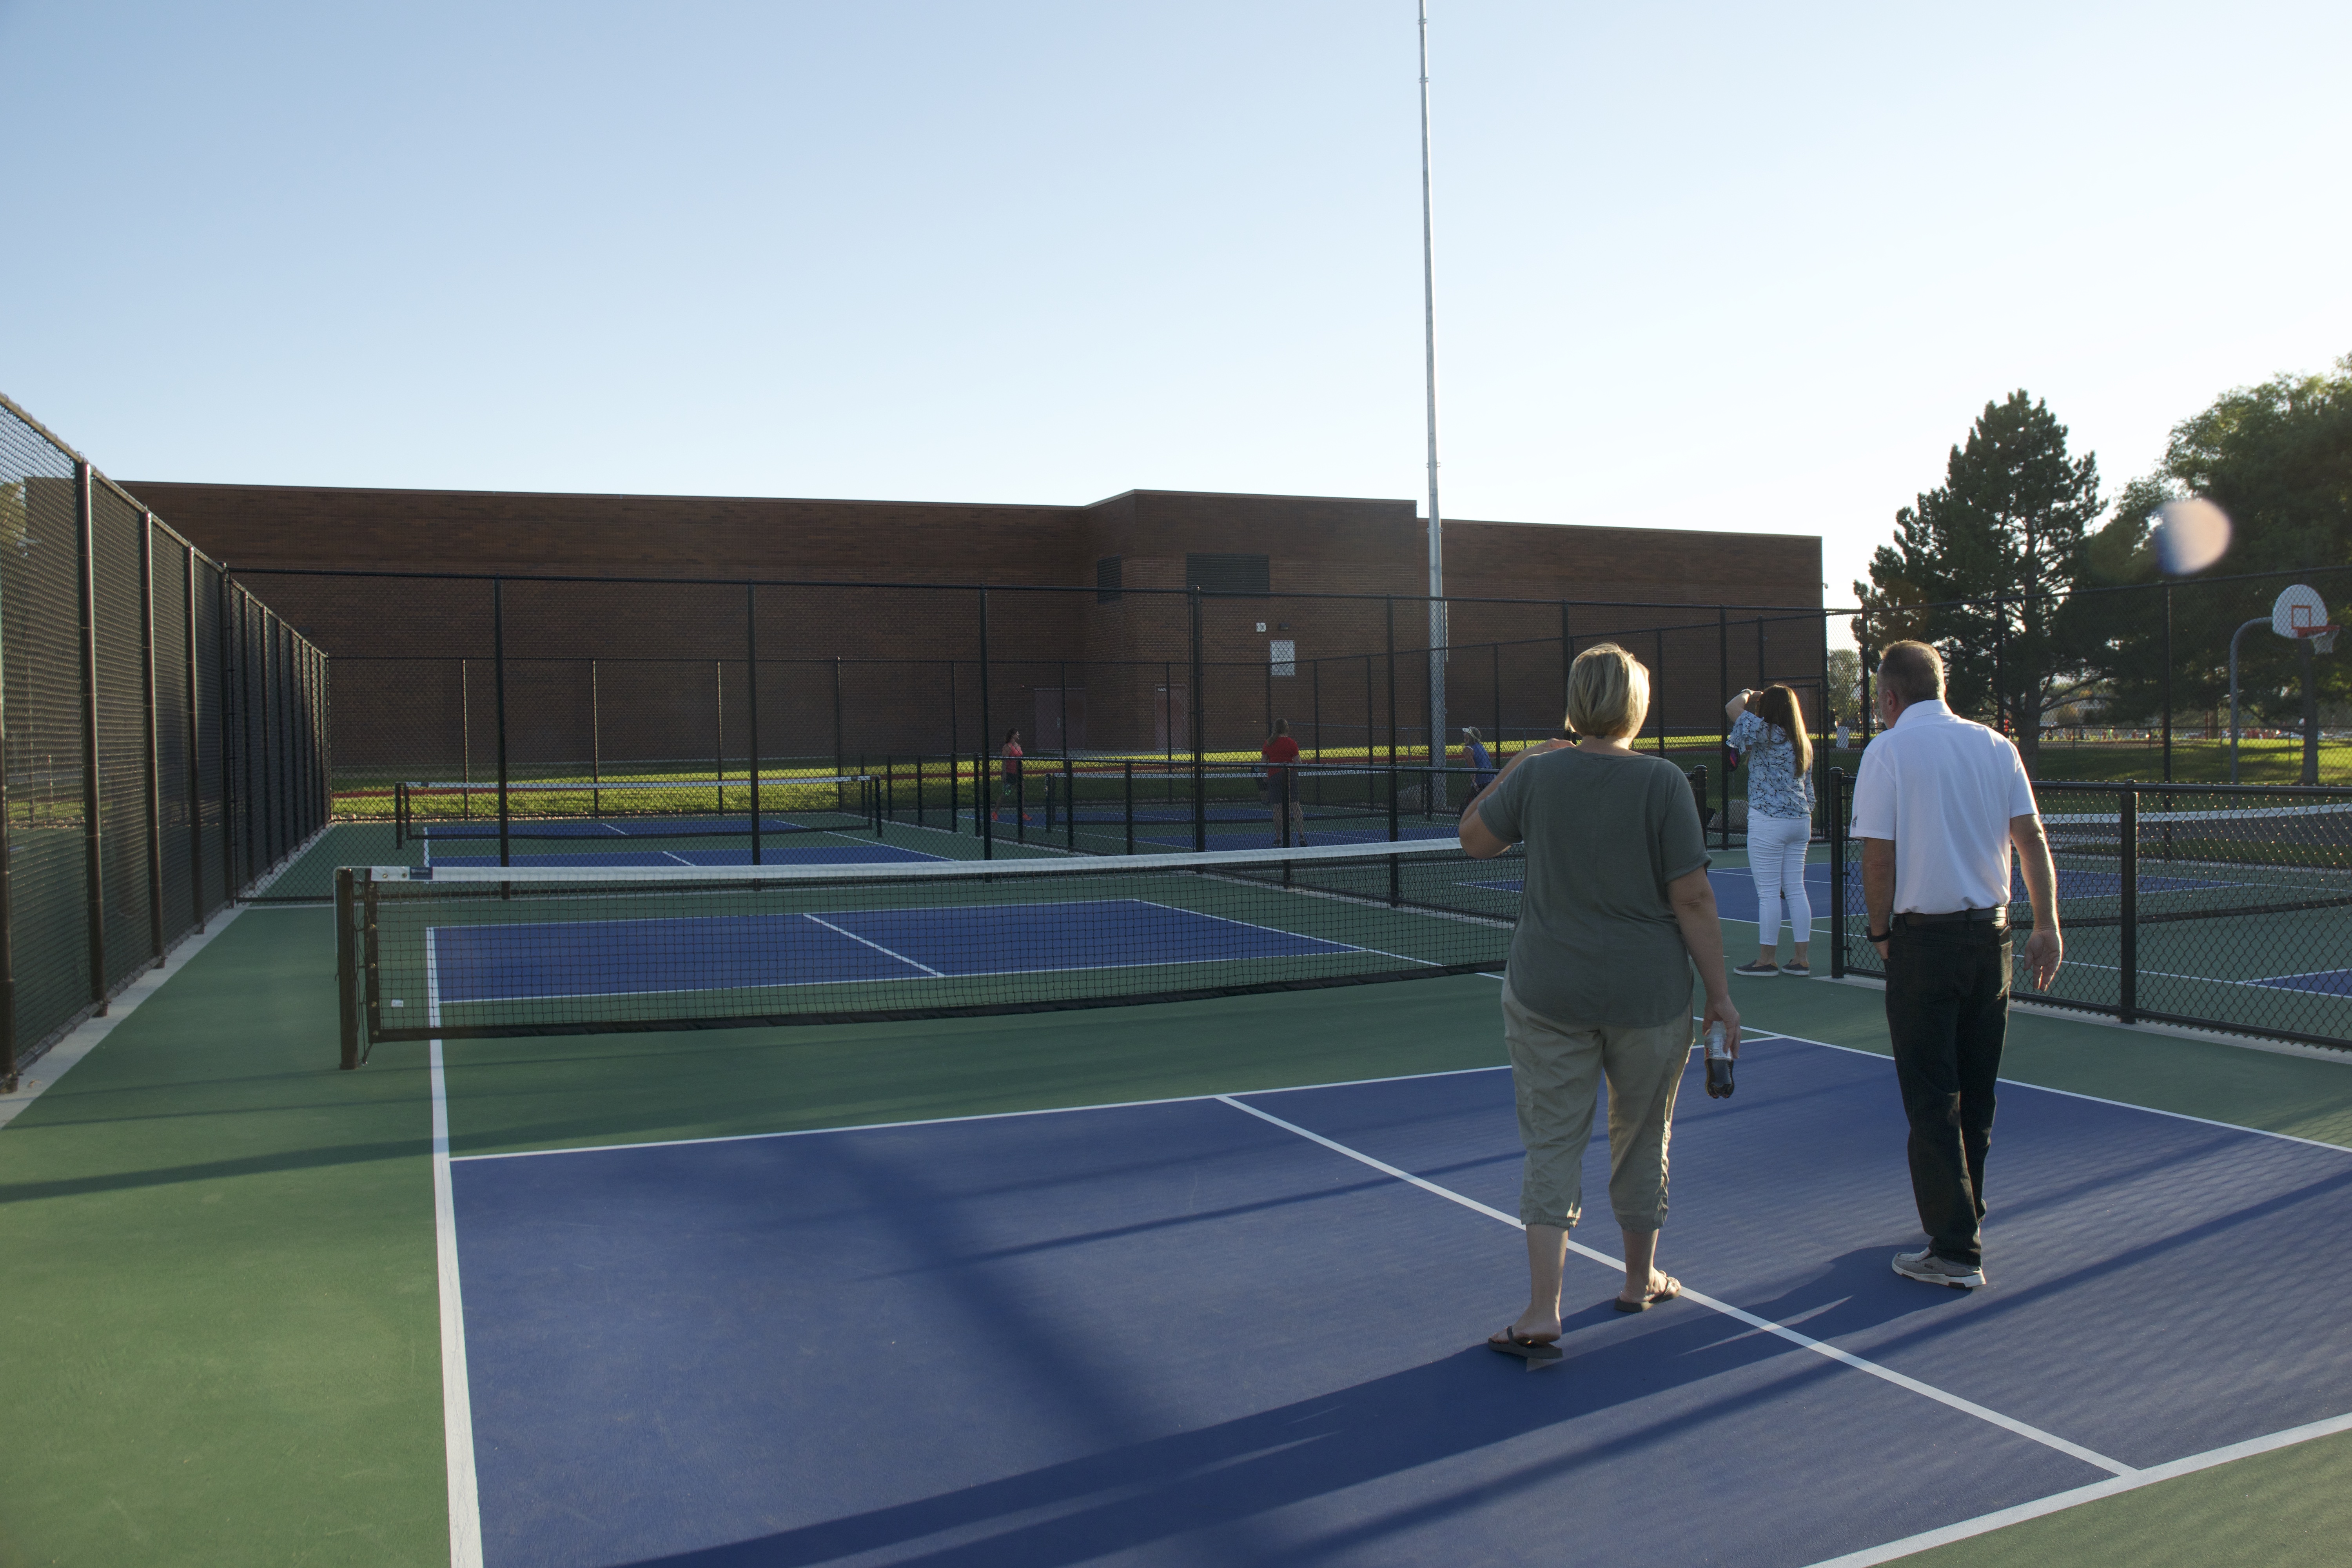 Park upgrades include resurfaced pickleball courts and water-wise landscaping